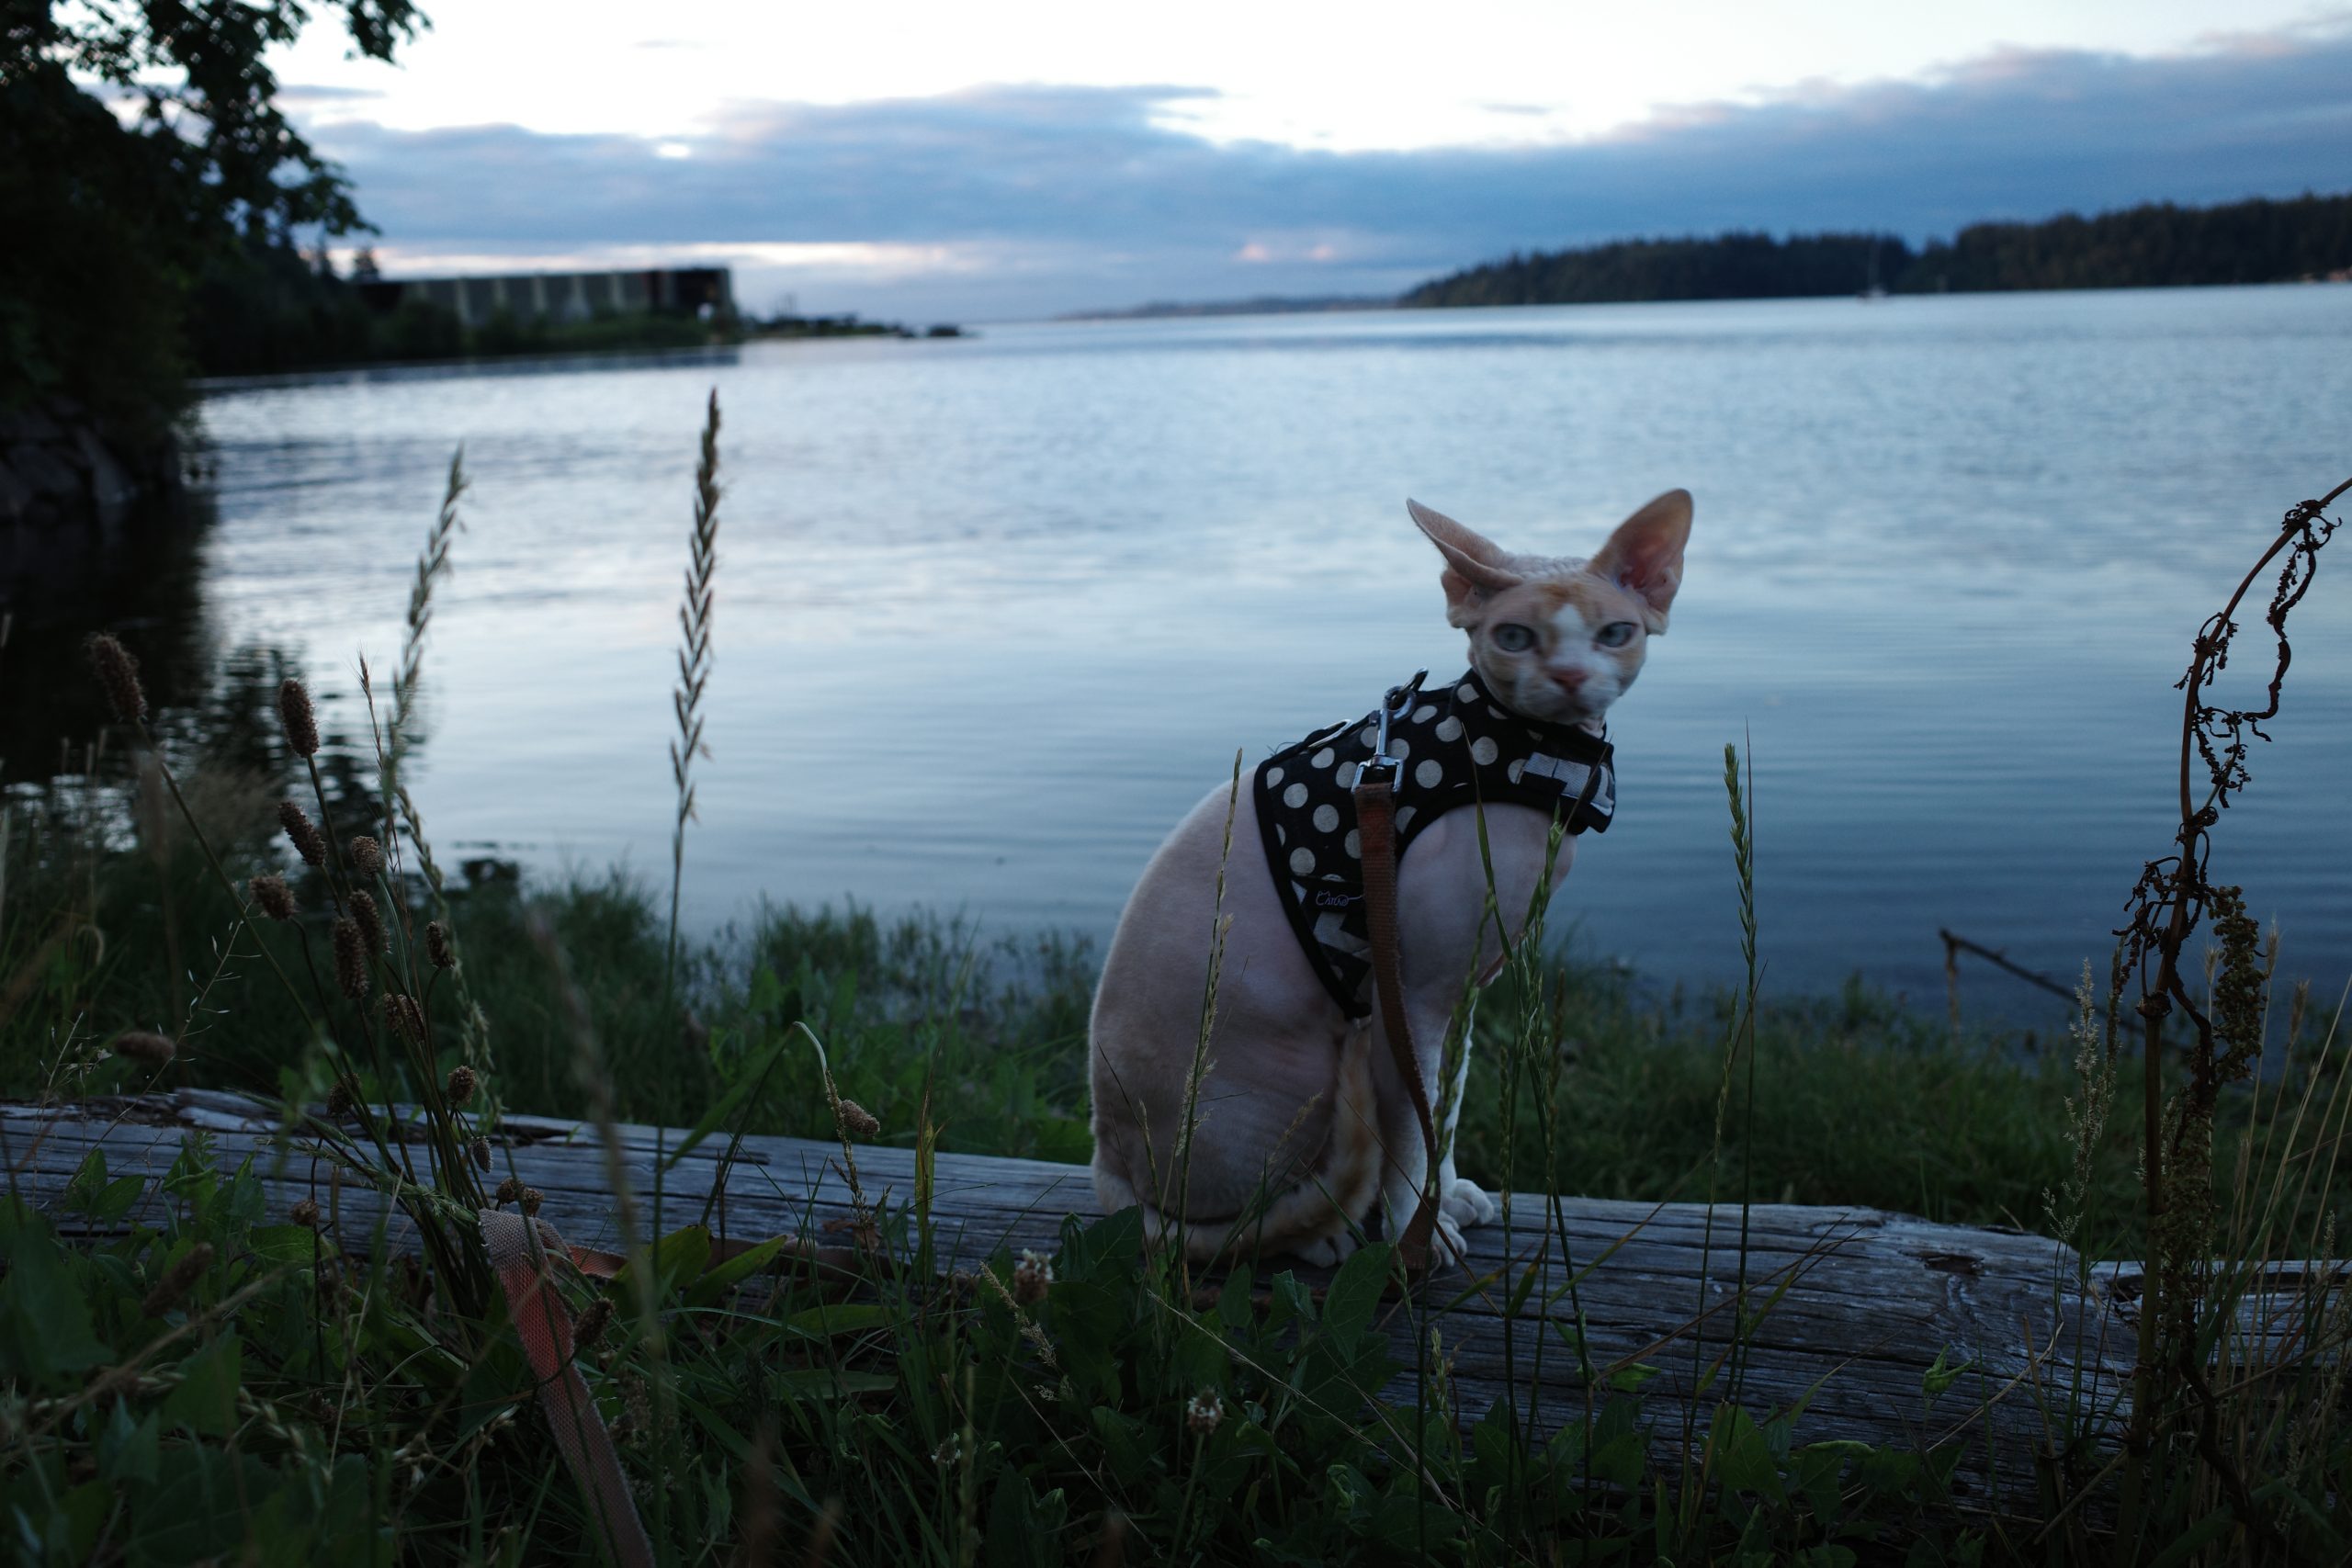 Pictire of hairless cat sitting near a lake